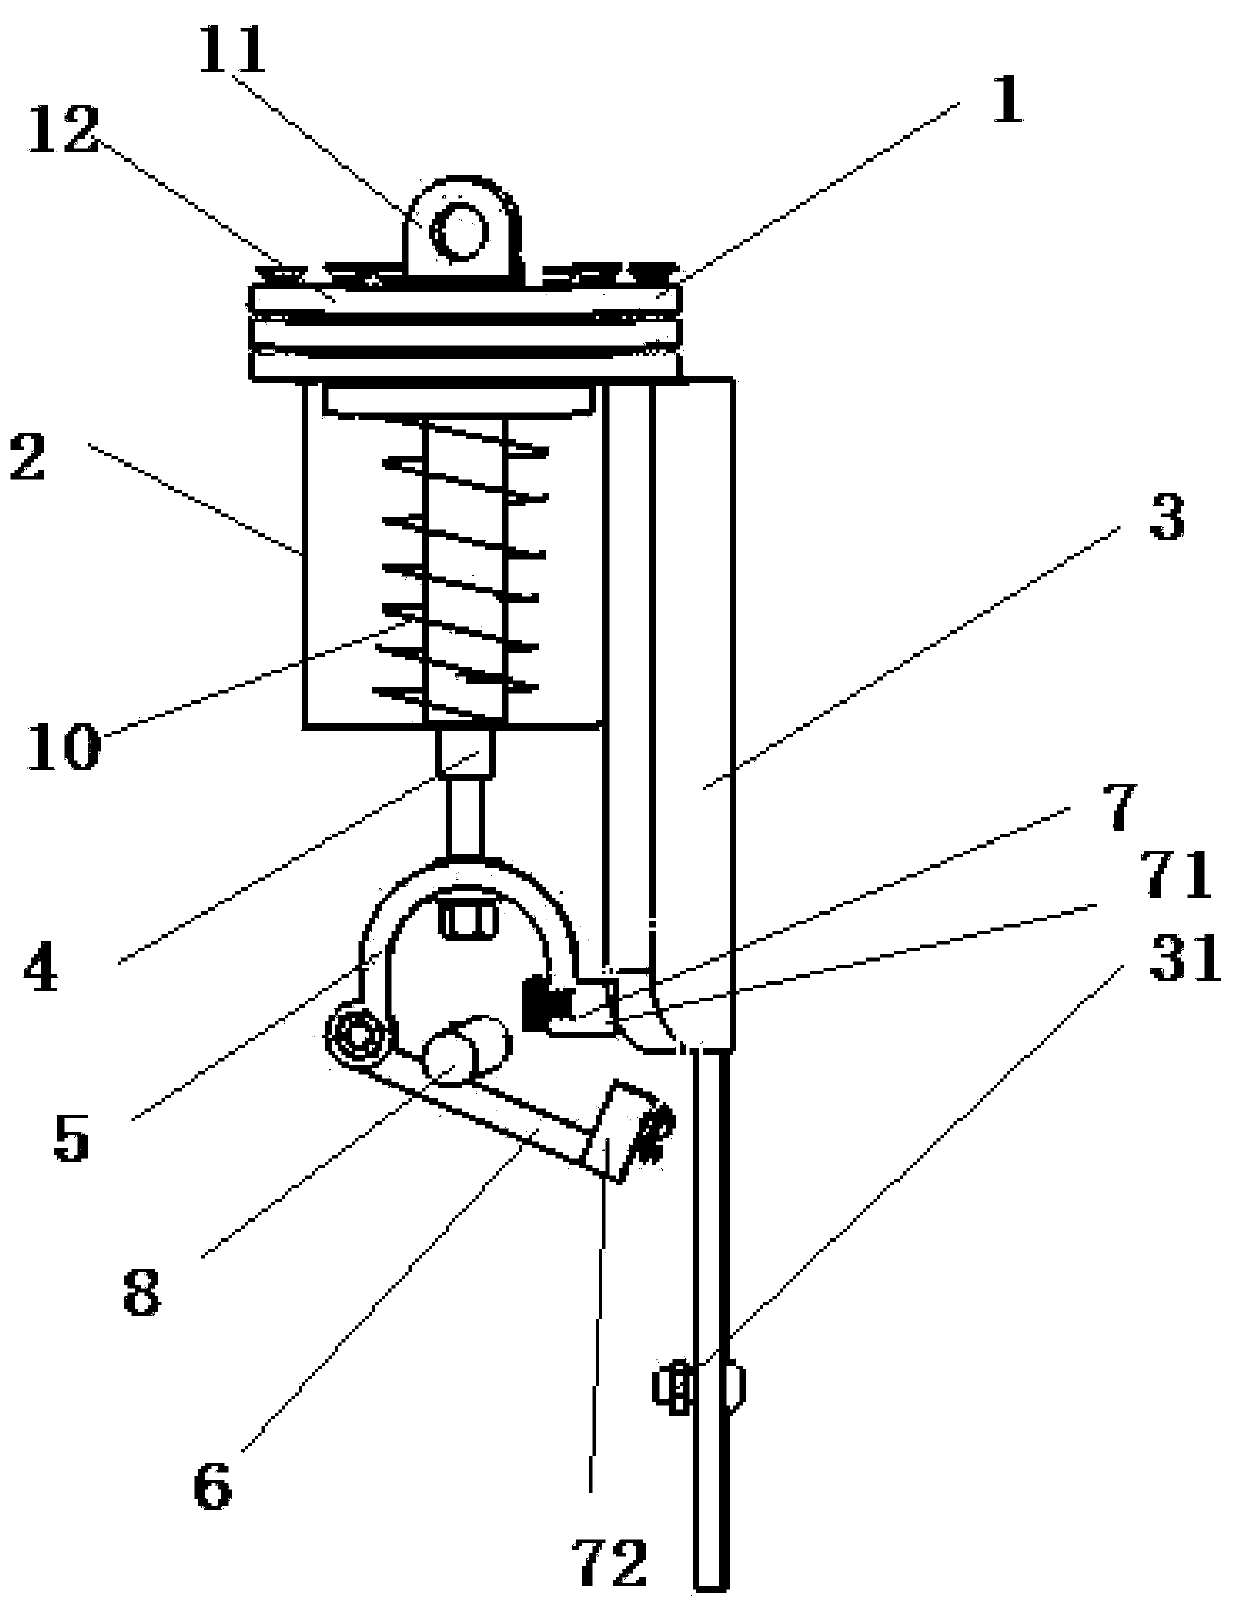 A wire-abandoning protection pole device for distribution lines